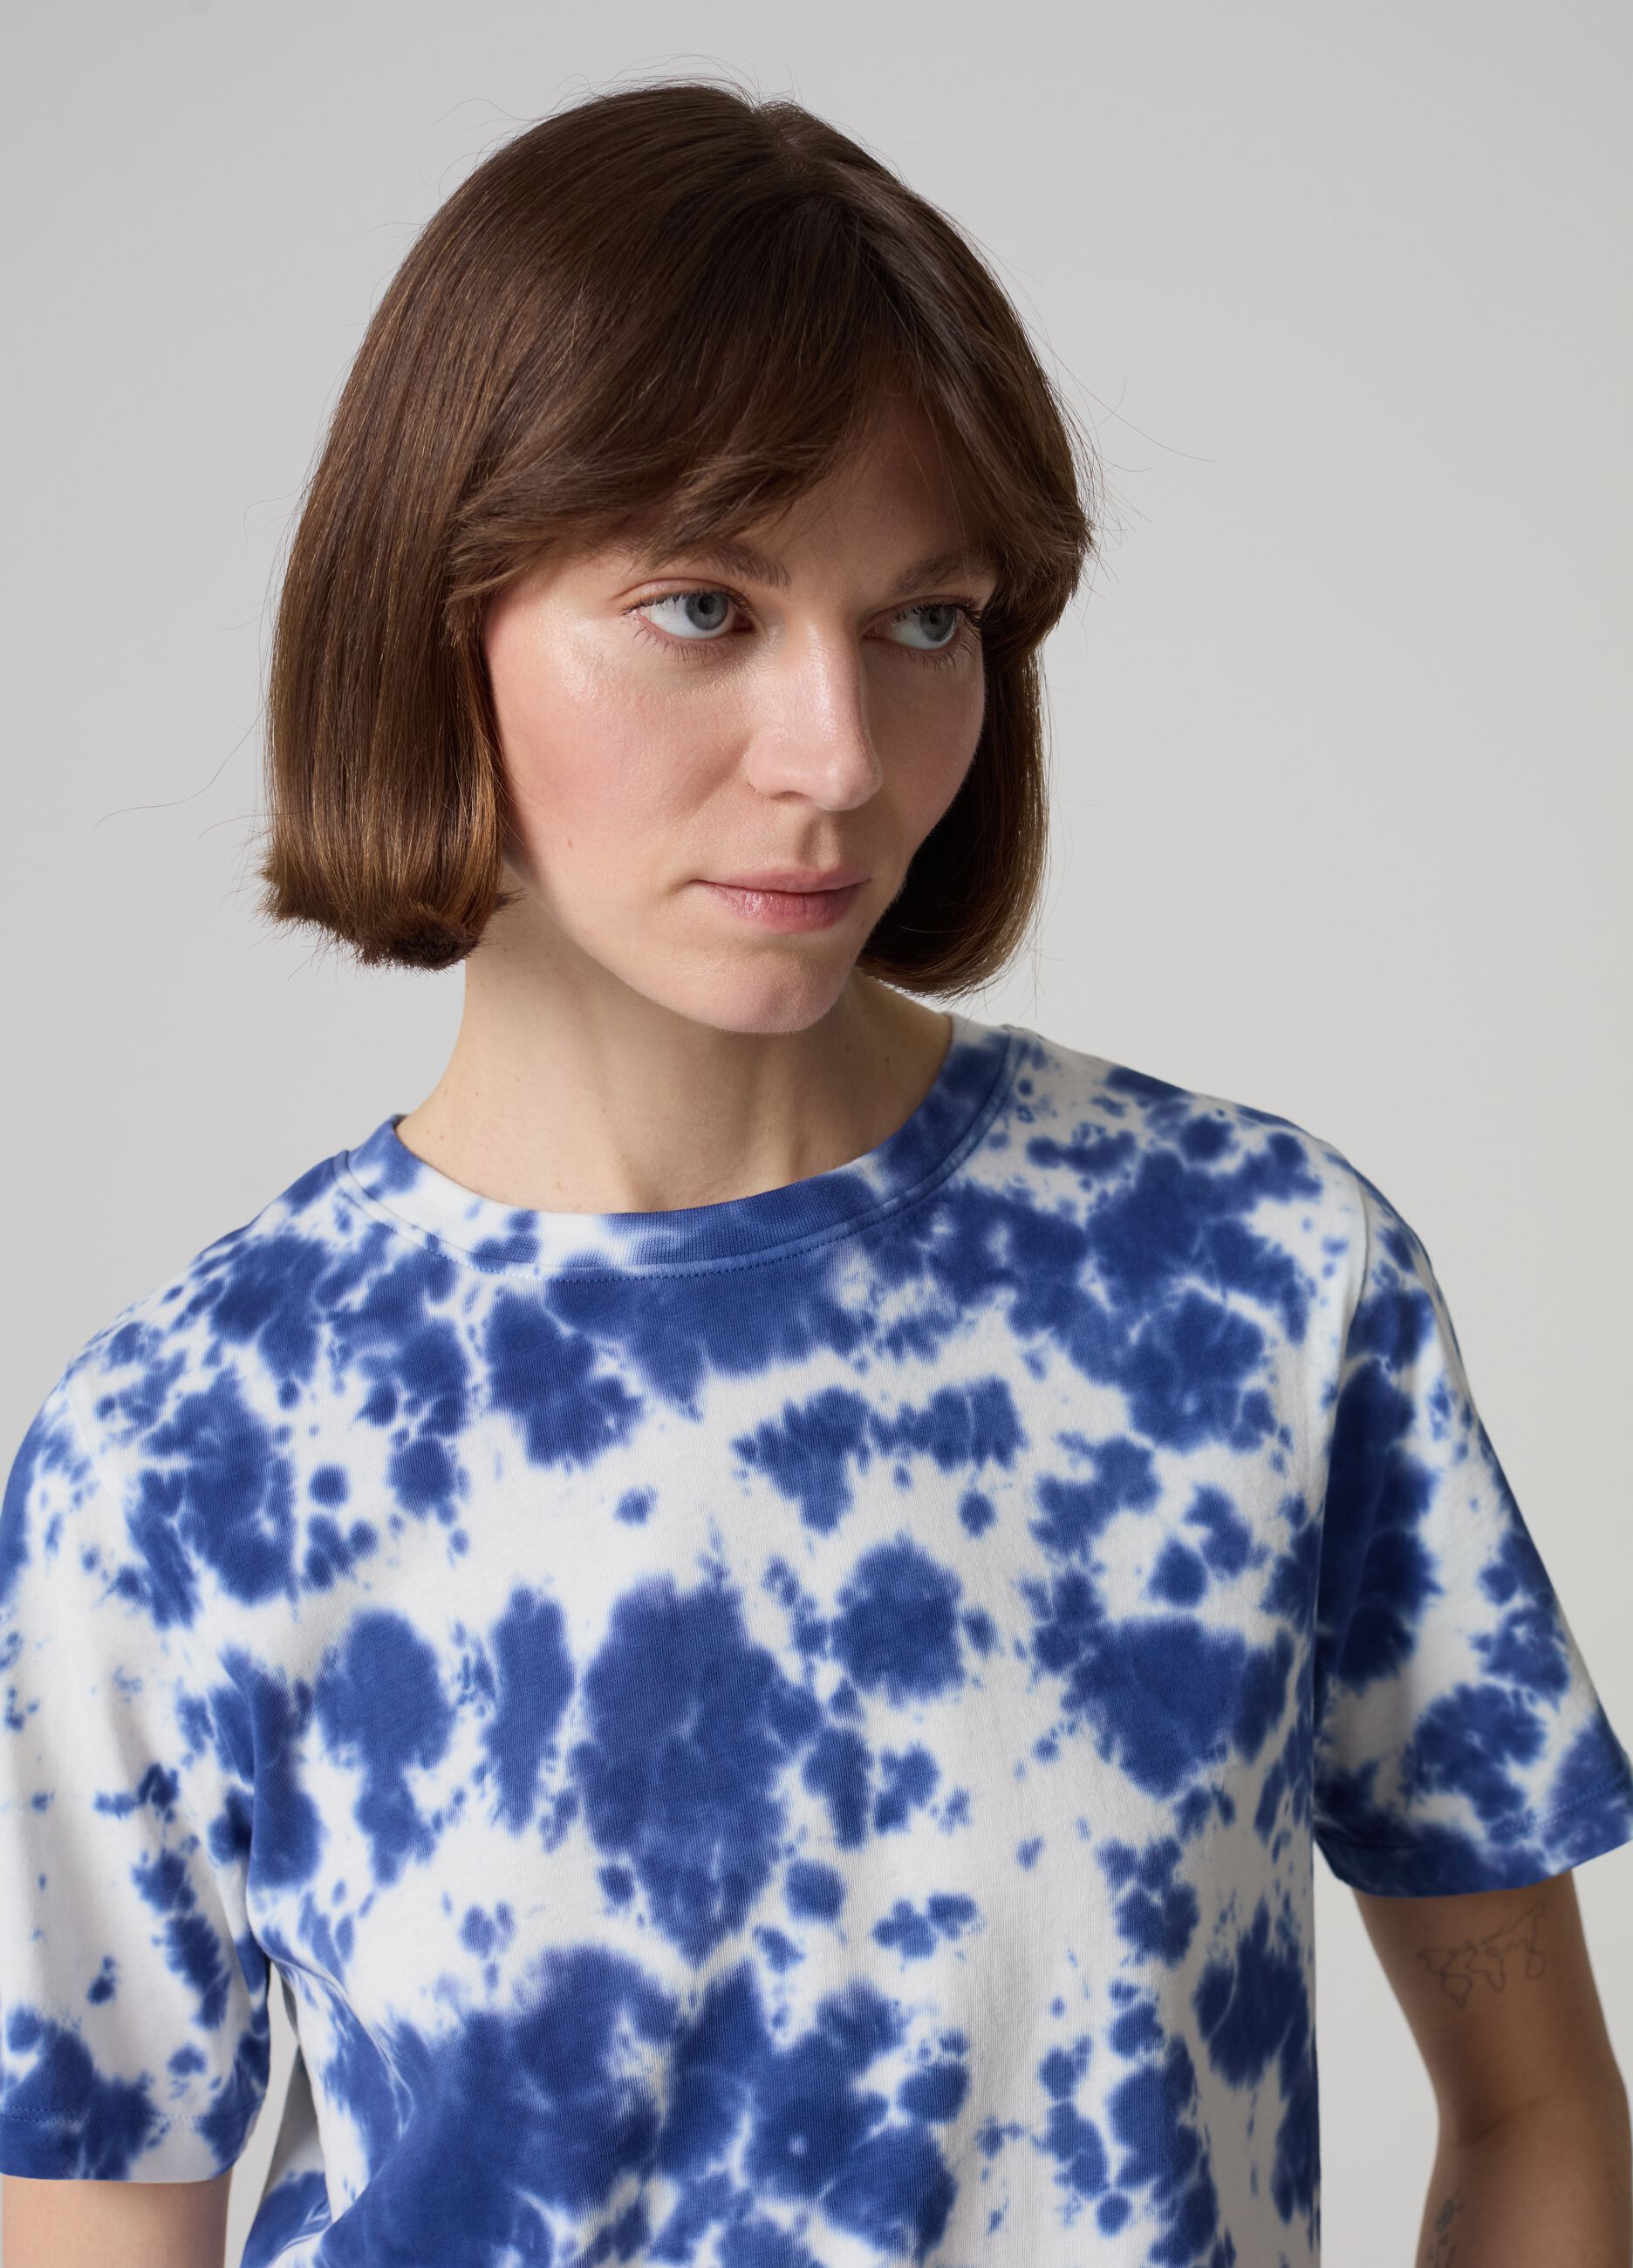 T-shirt in cotton with tie-dye print